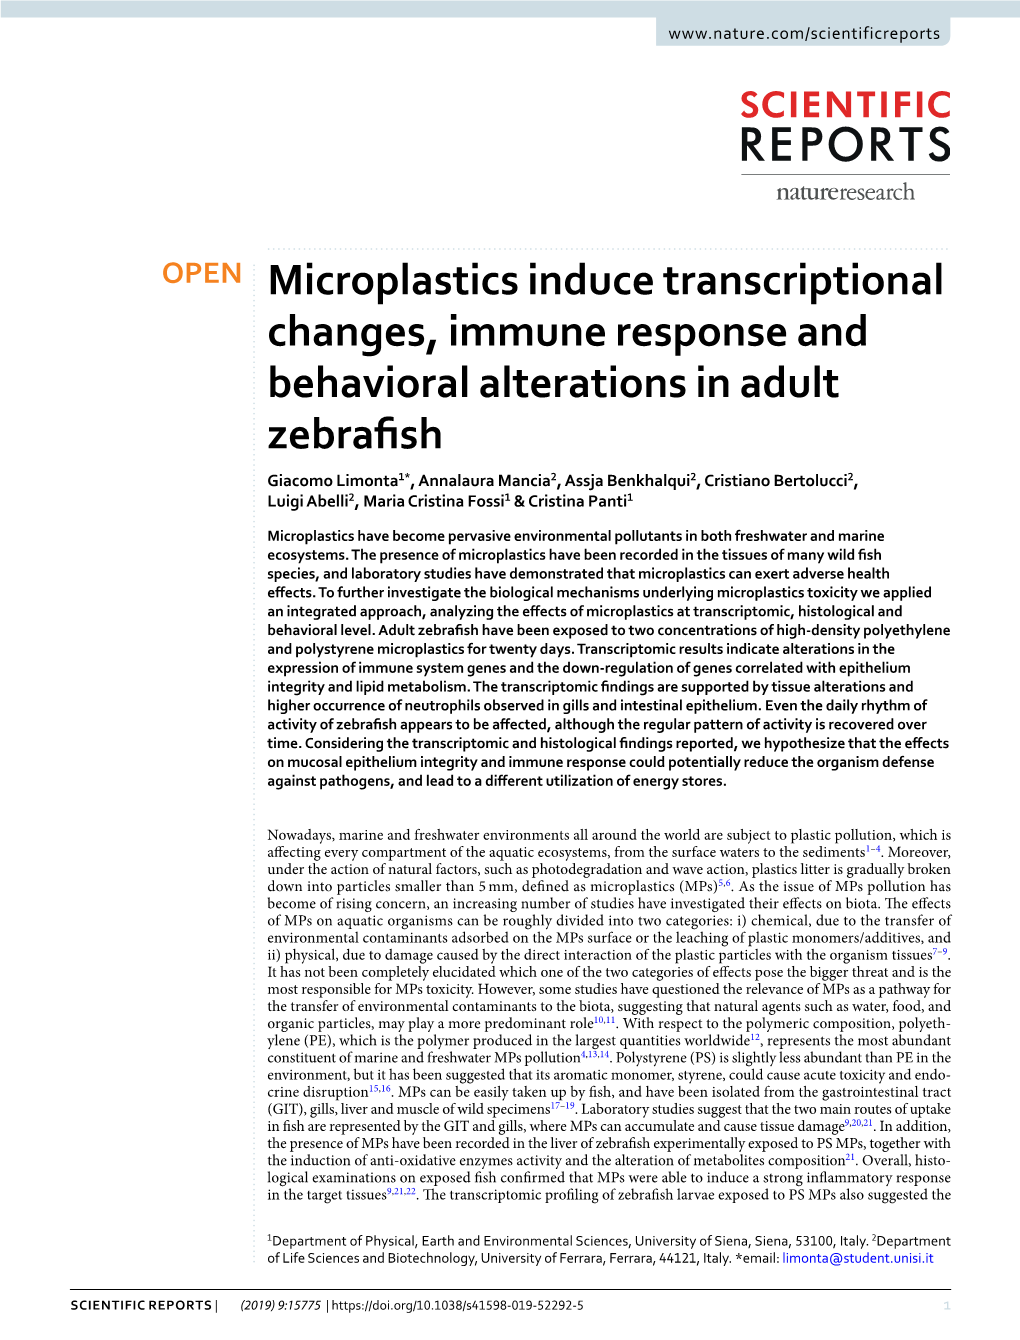 Microplastics Induce Transcriptional Changes, Immune Response And